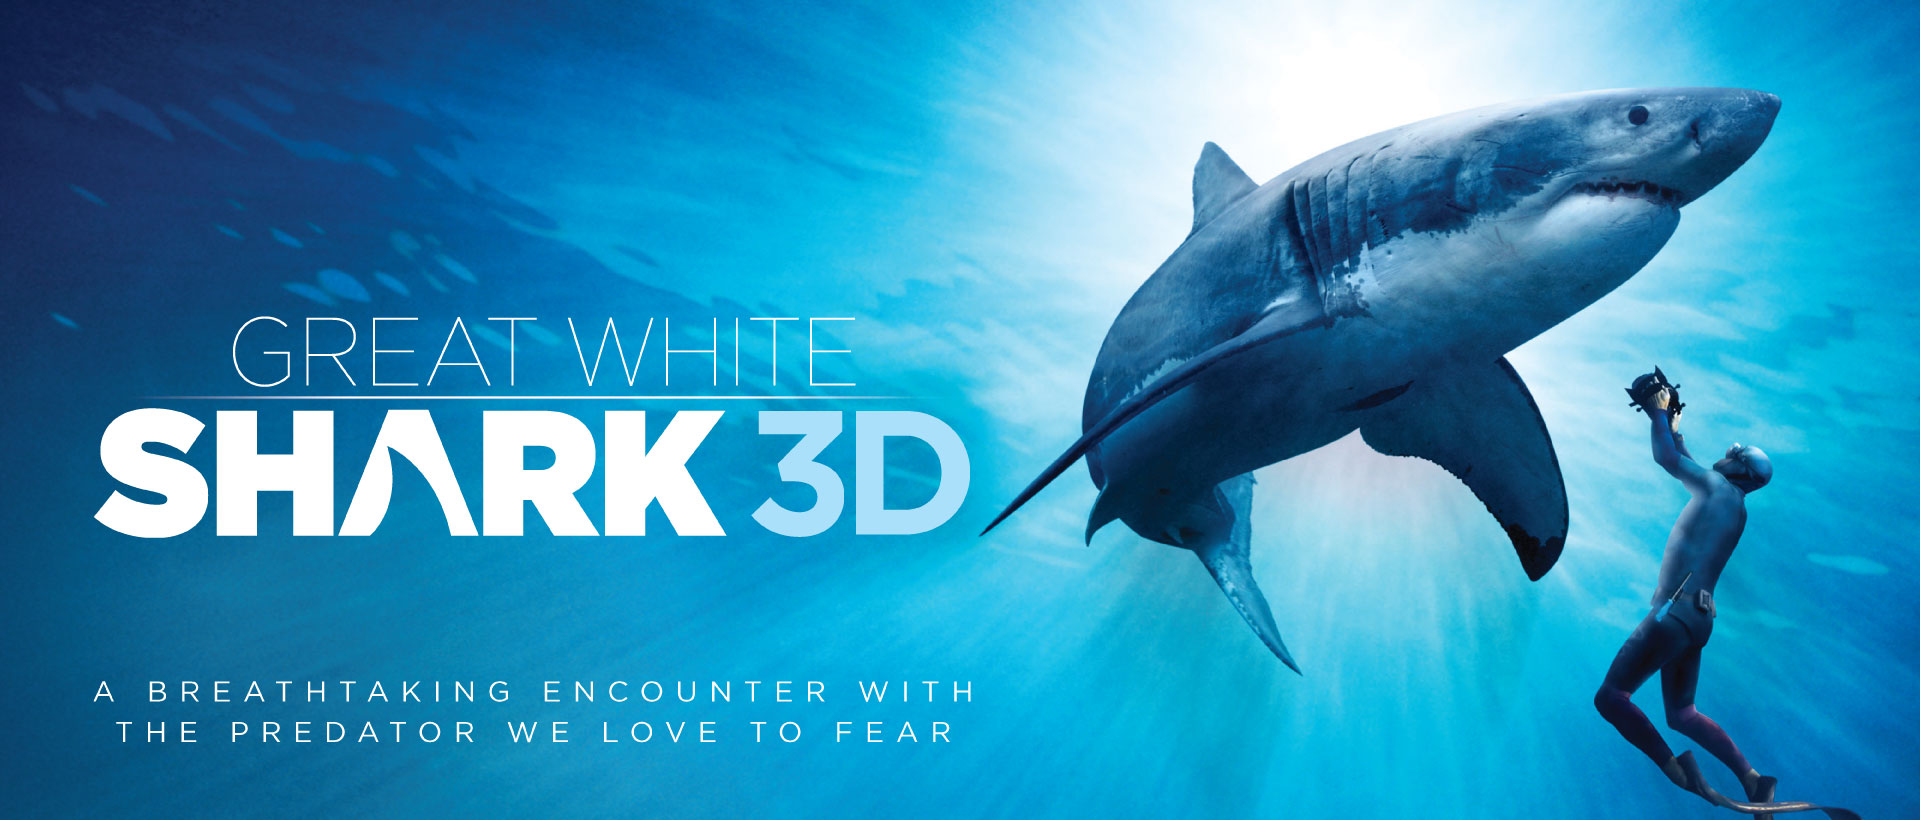 A scuba swimming towards a great white shark in the open ocean. The title reads GREAT WHITE SHARK 3D: A BREATHTAKING ENCOUNTER WITH THE PREDATOR WE LOVE TO FEAR.